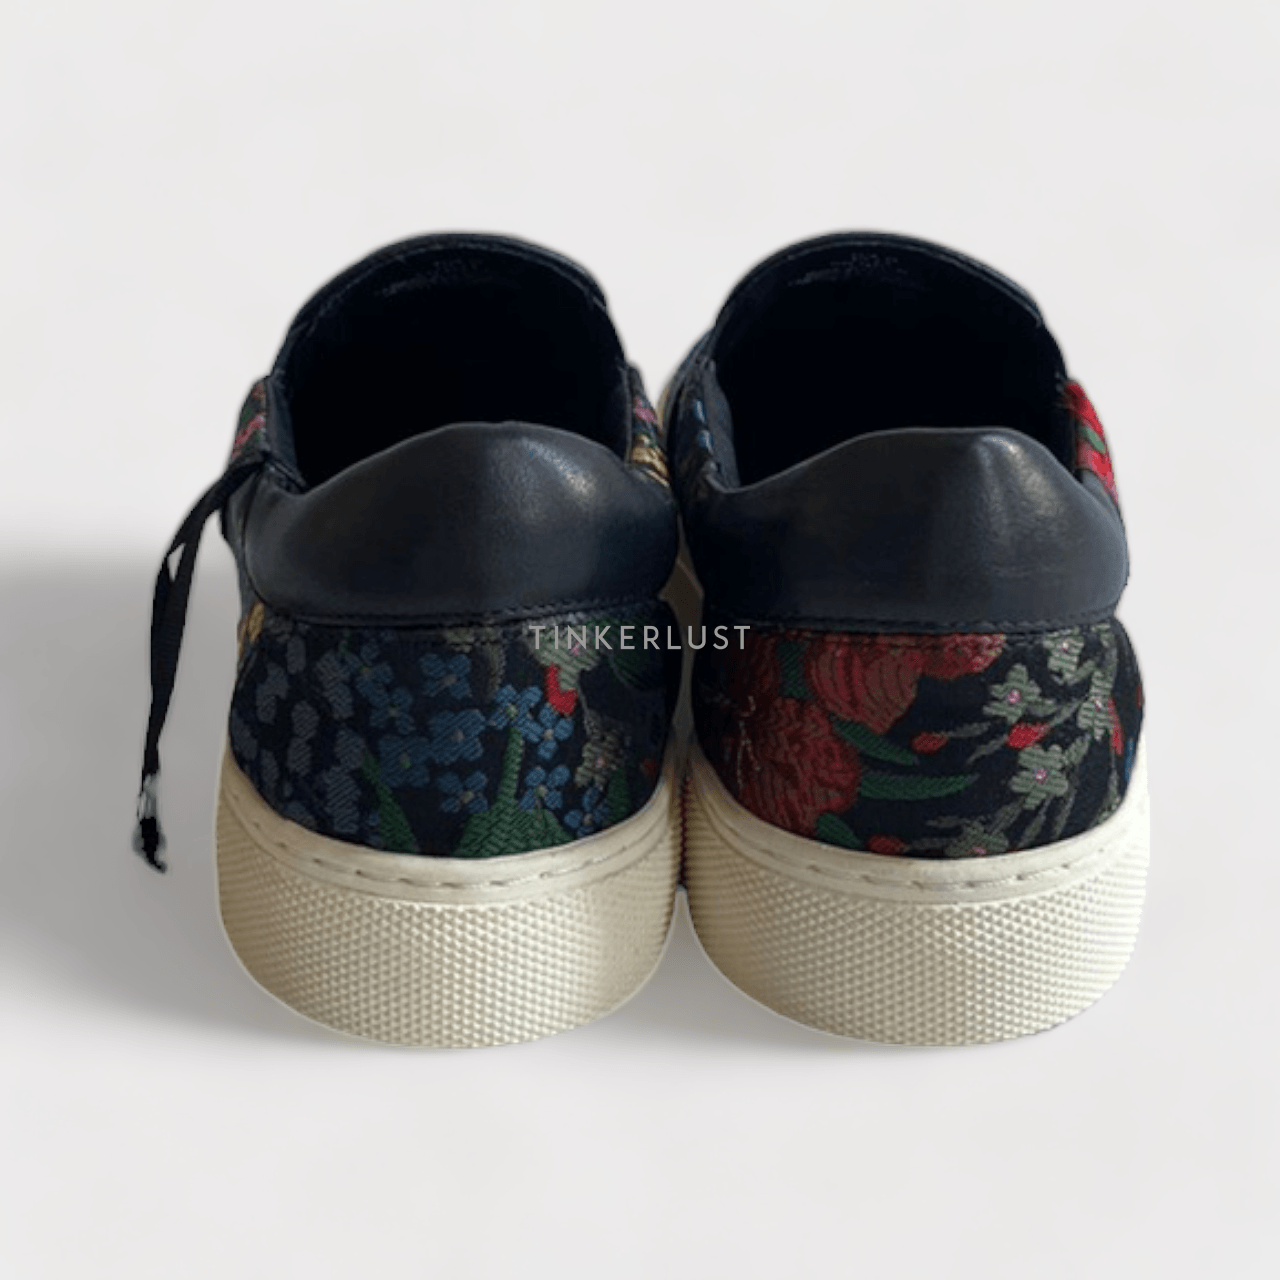 Erdem x H&M Jacquard Weave Fabric with a Shimmering Floral Pattern Slip On Sneakers